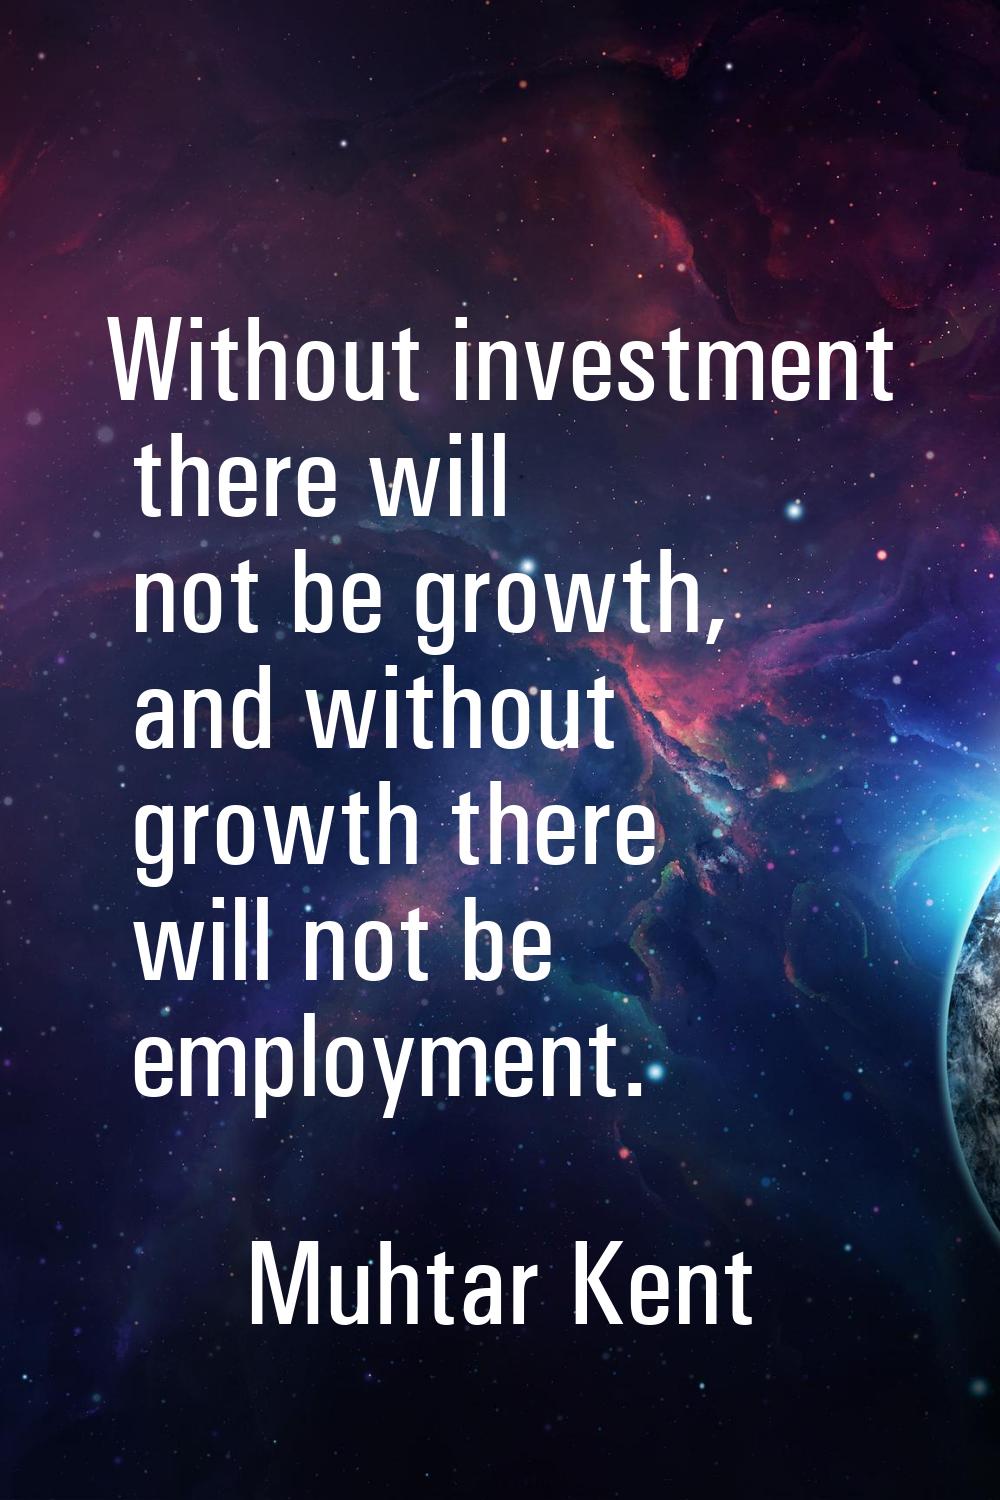 Without investment there will not be growth, and without growth there will not be employment.